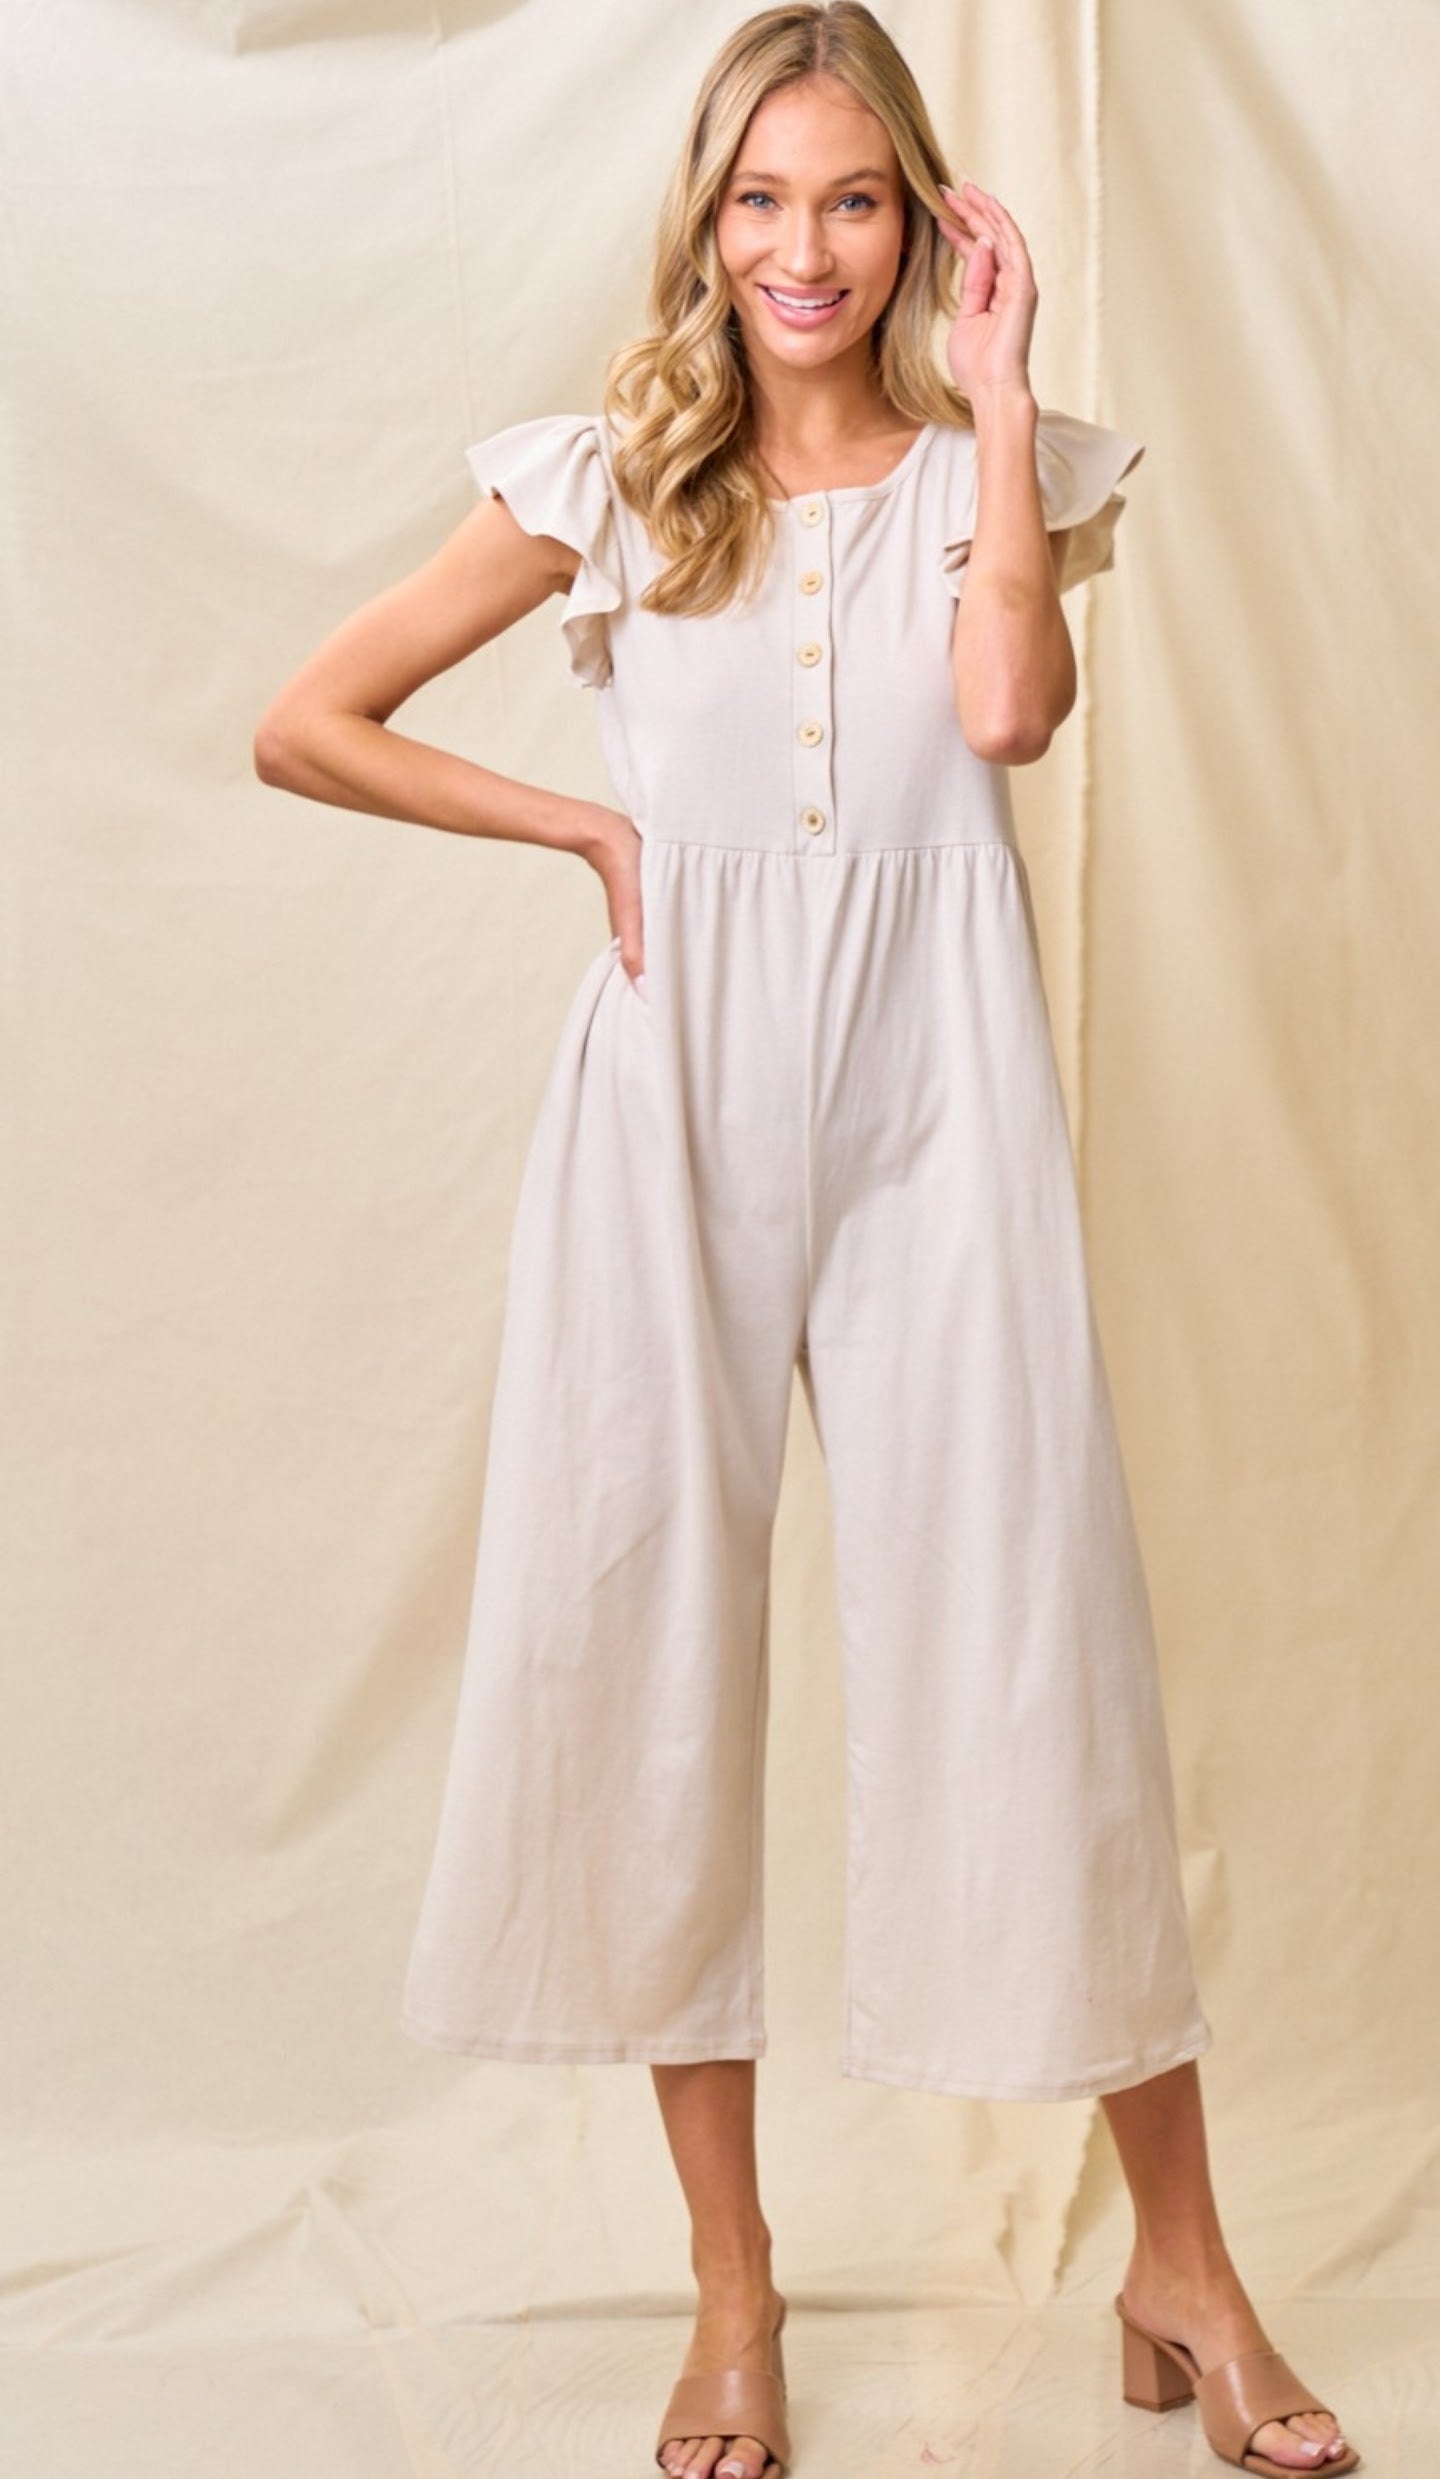 The Lovely Dove Jumpsuit